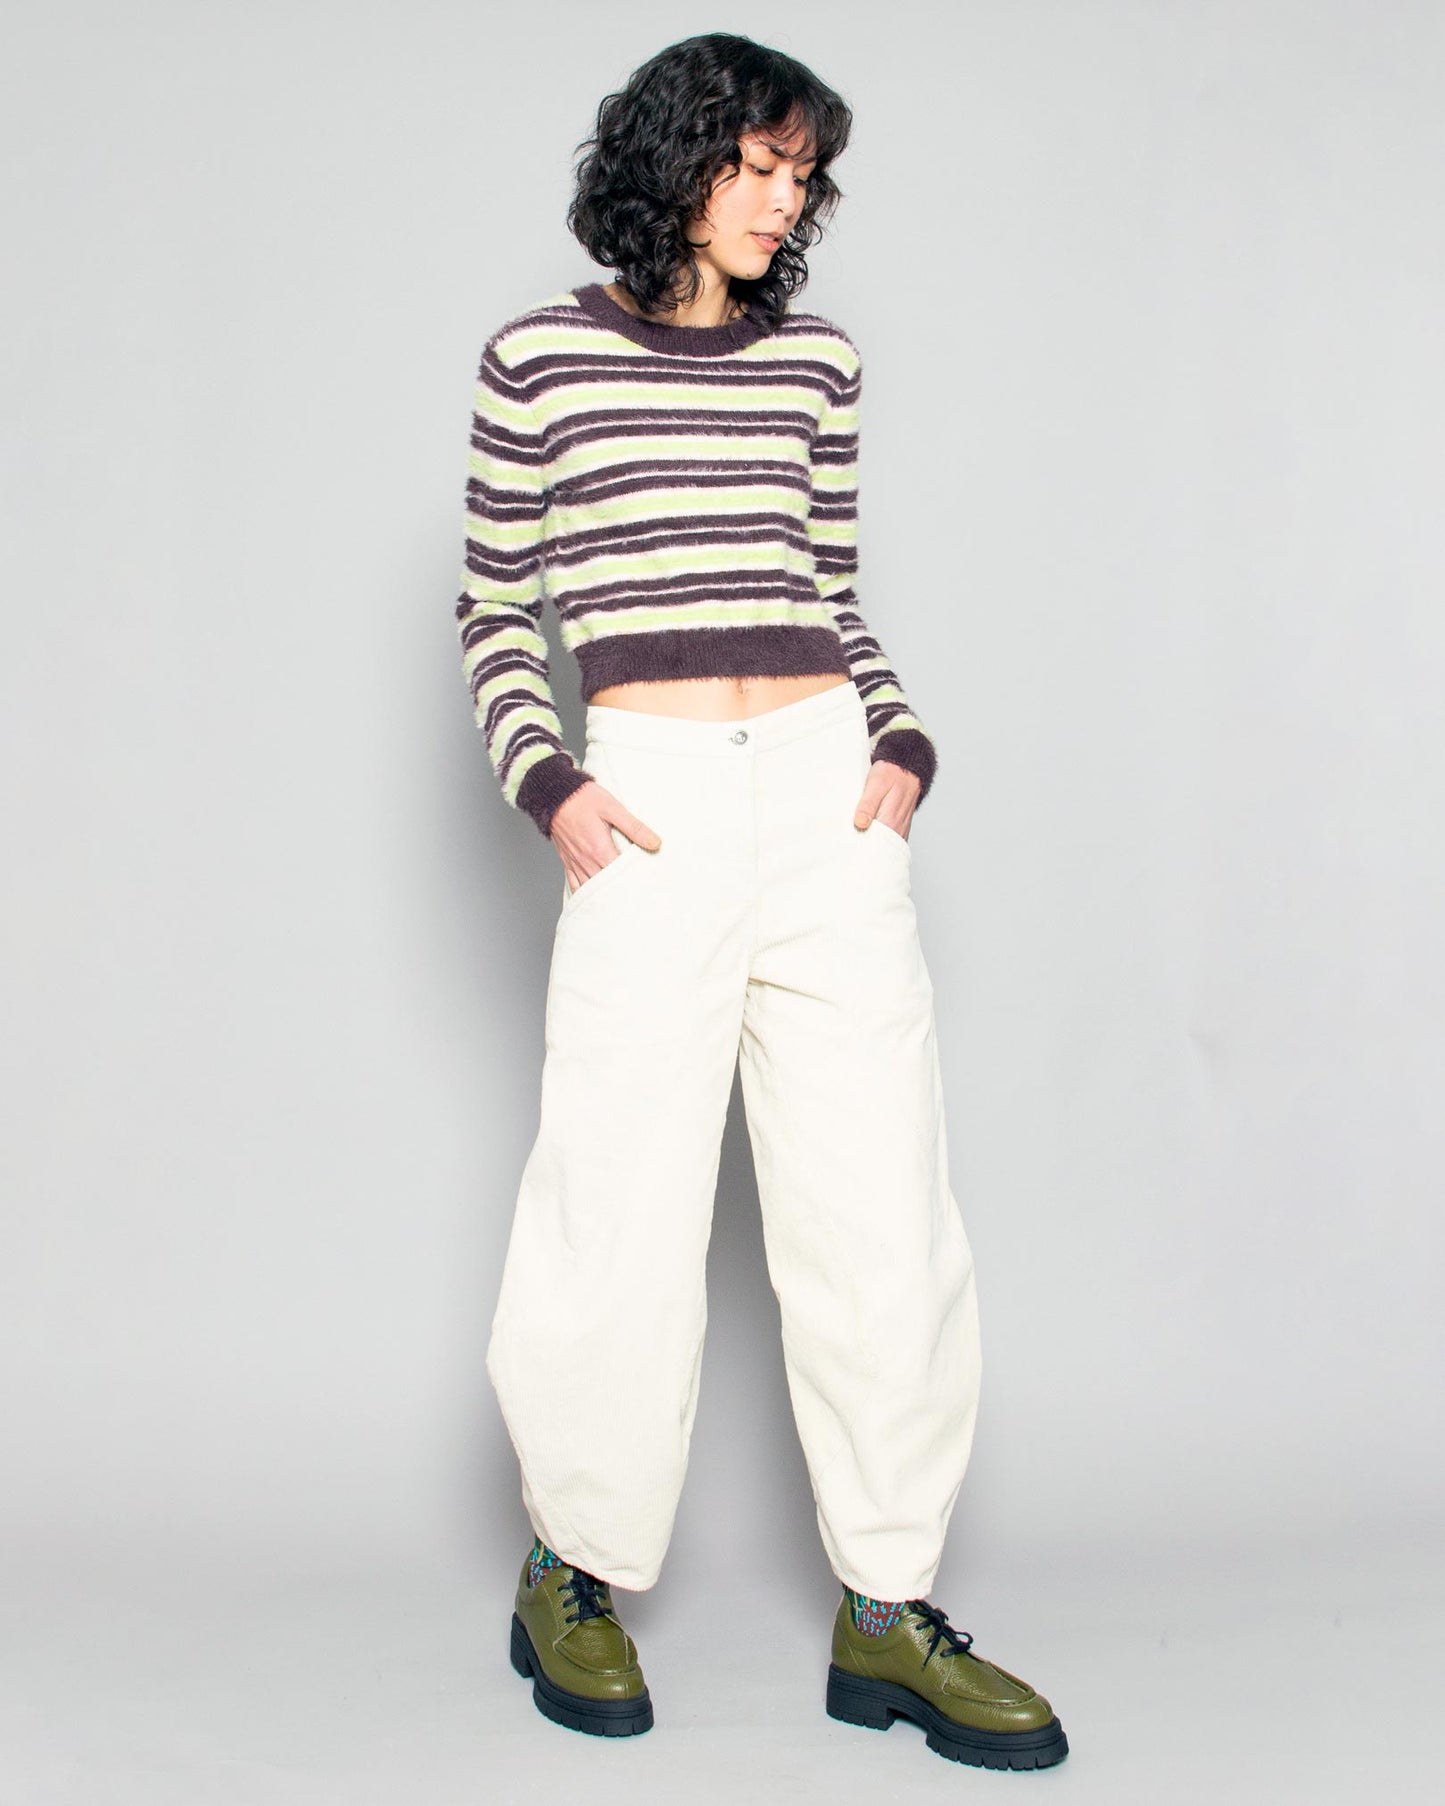 PERSONS Vera Fuzzy Sweater in Matcha Stripe available at Lahn.shop